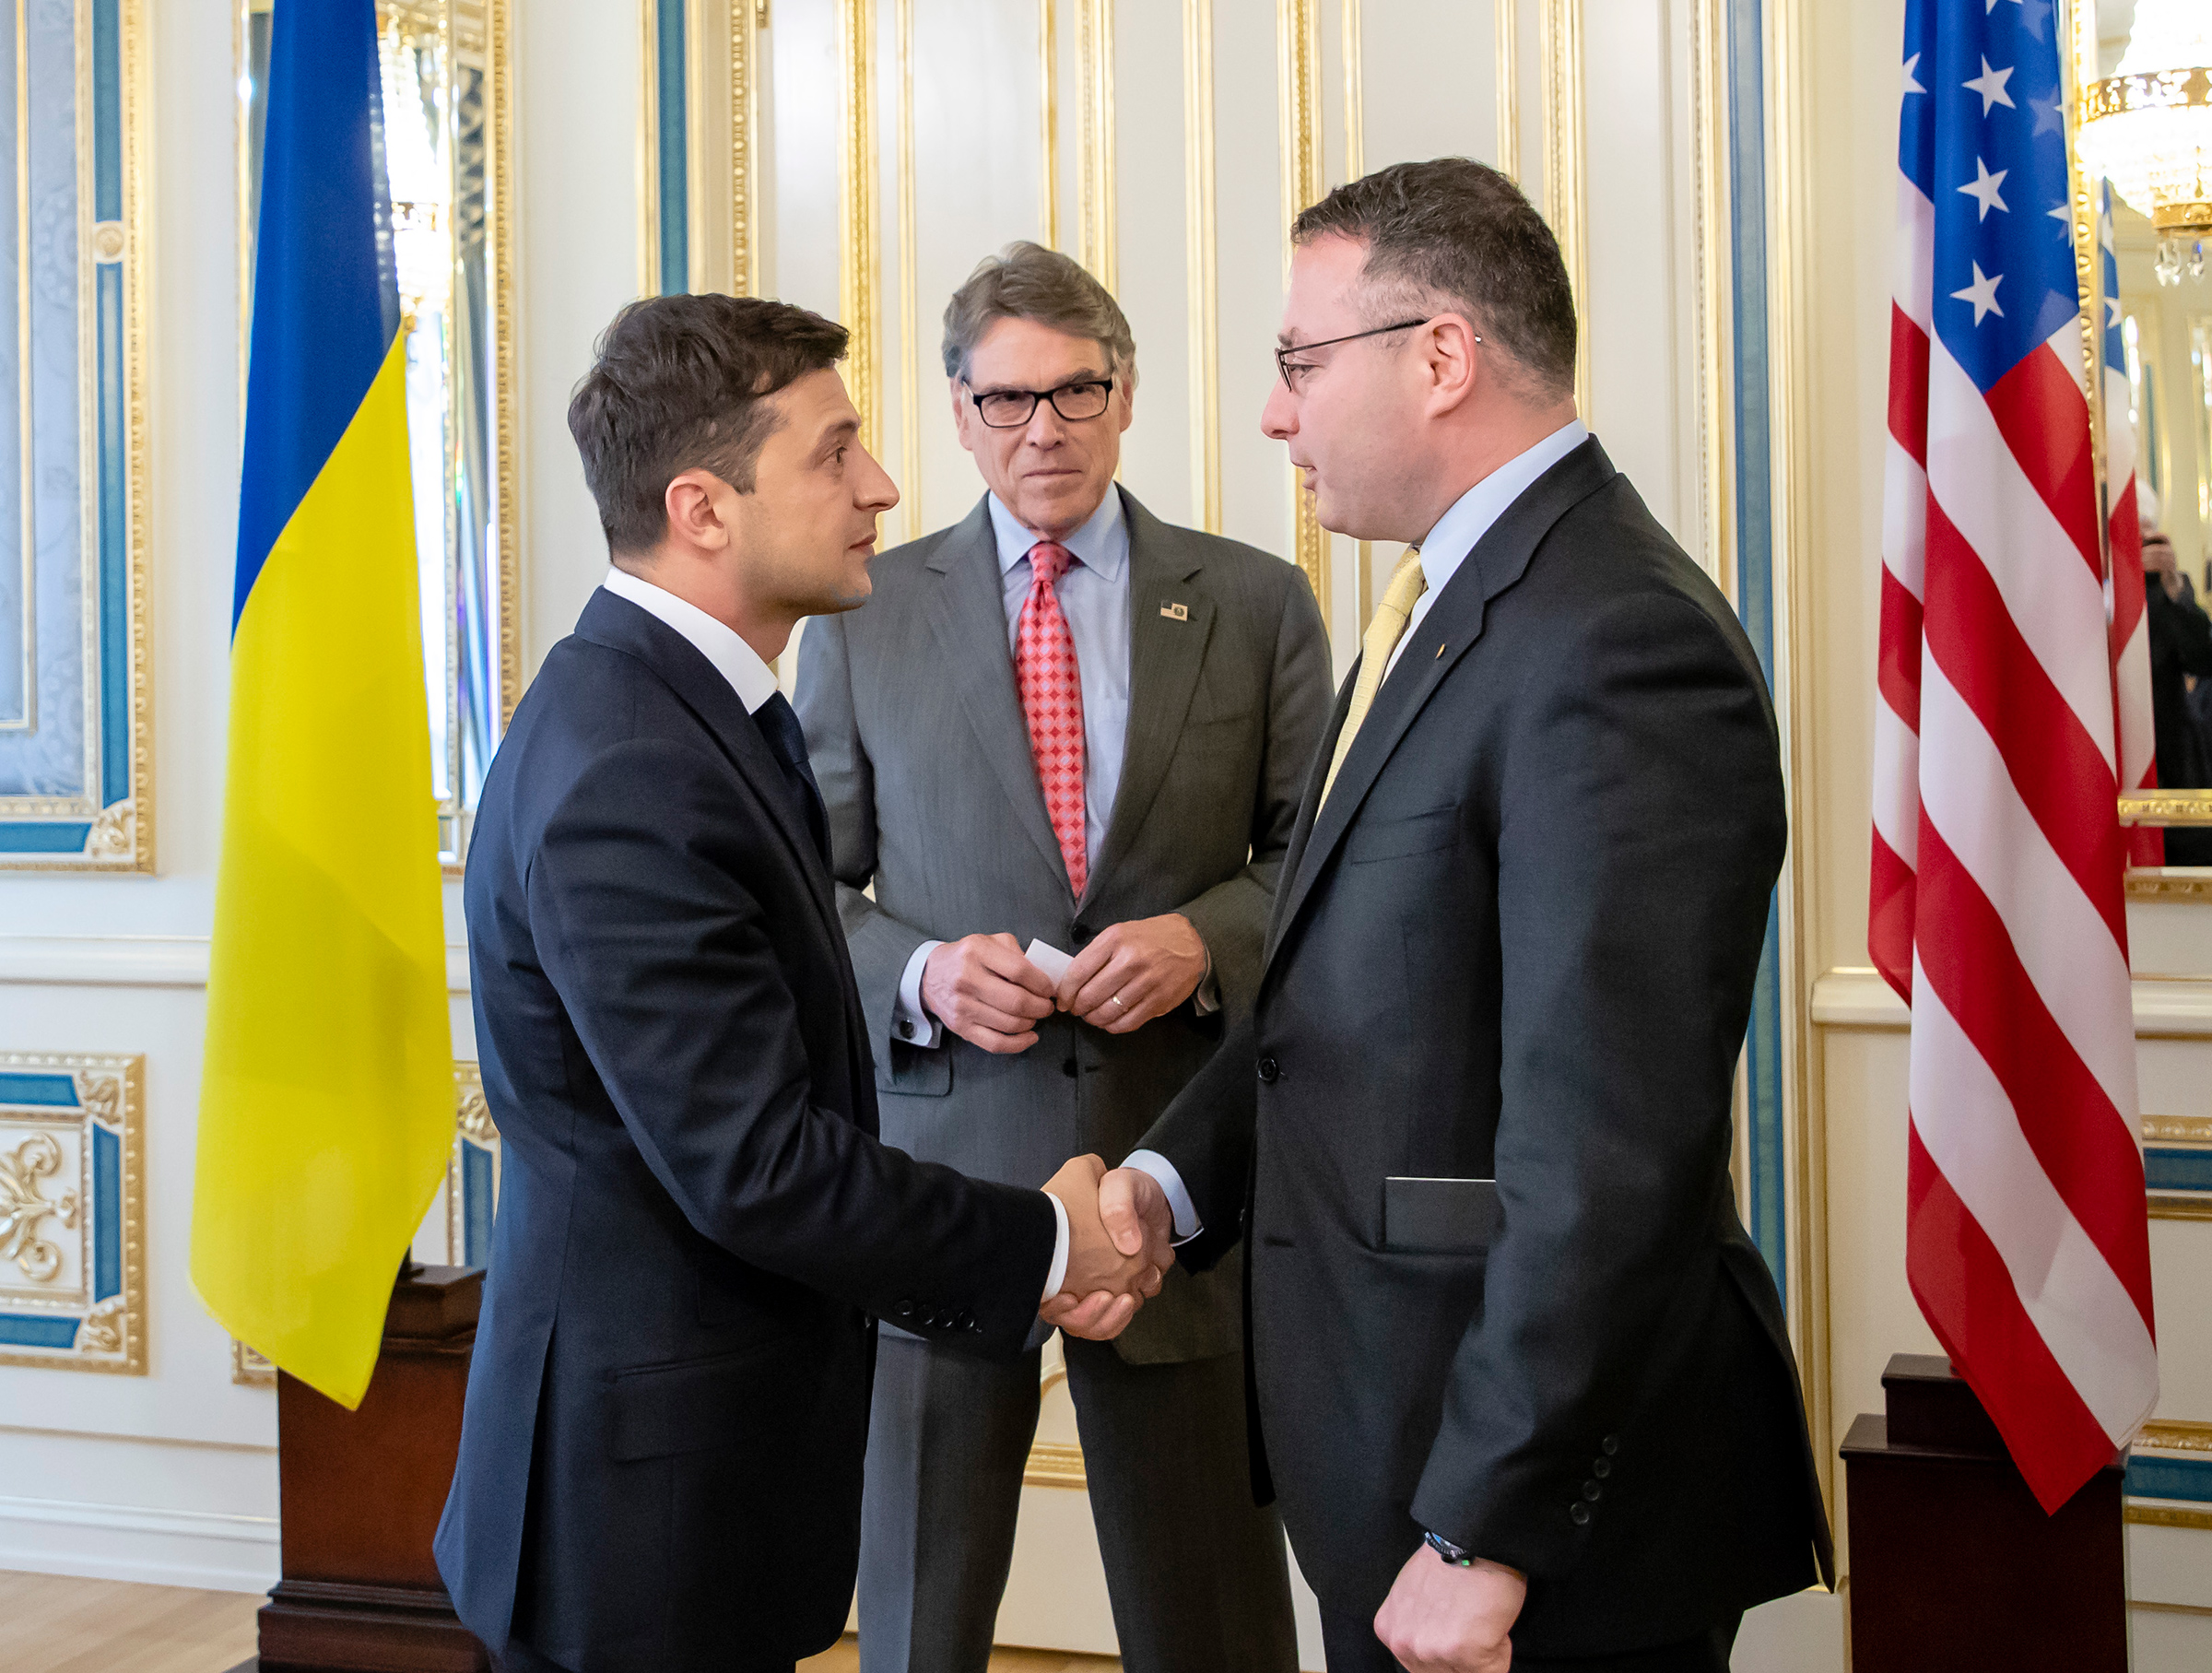 Perry holds energy talks with Zelensky, left, in Kyiv on May 20, 2019